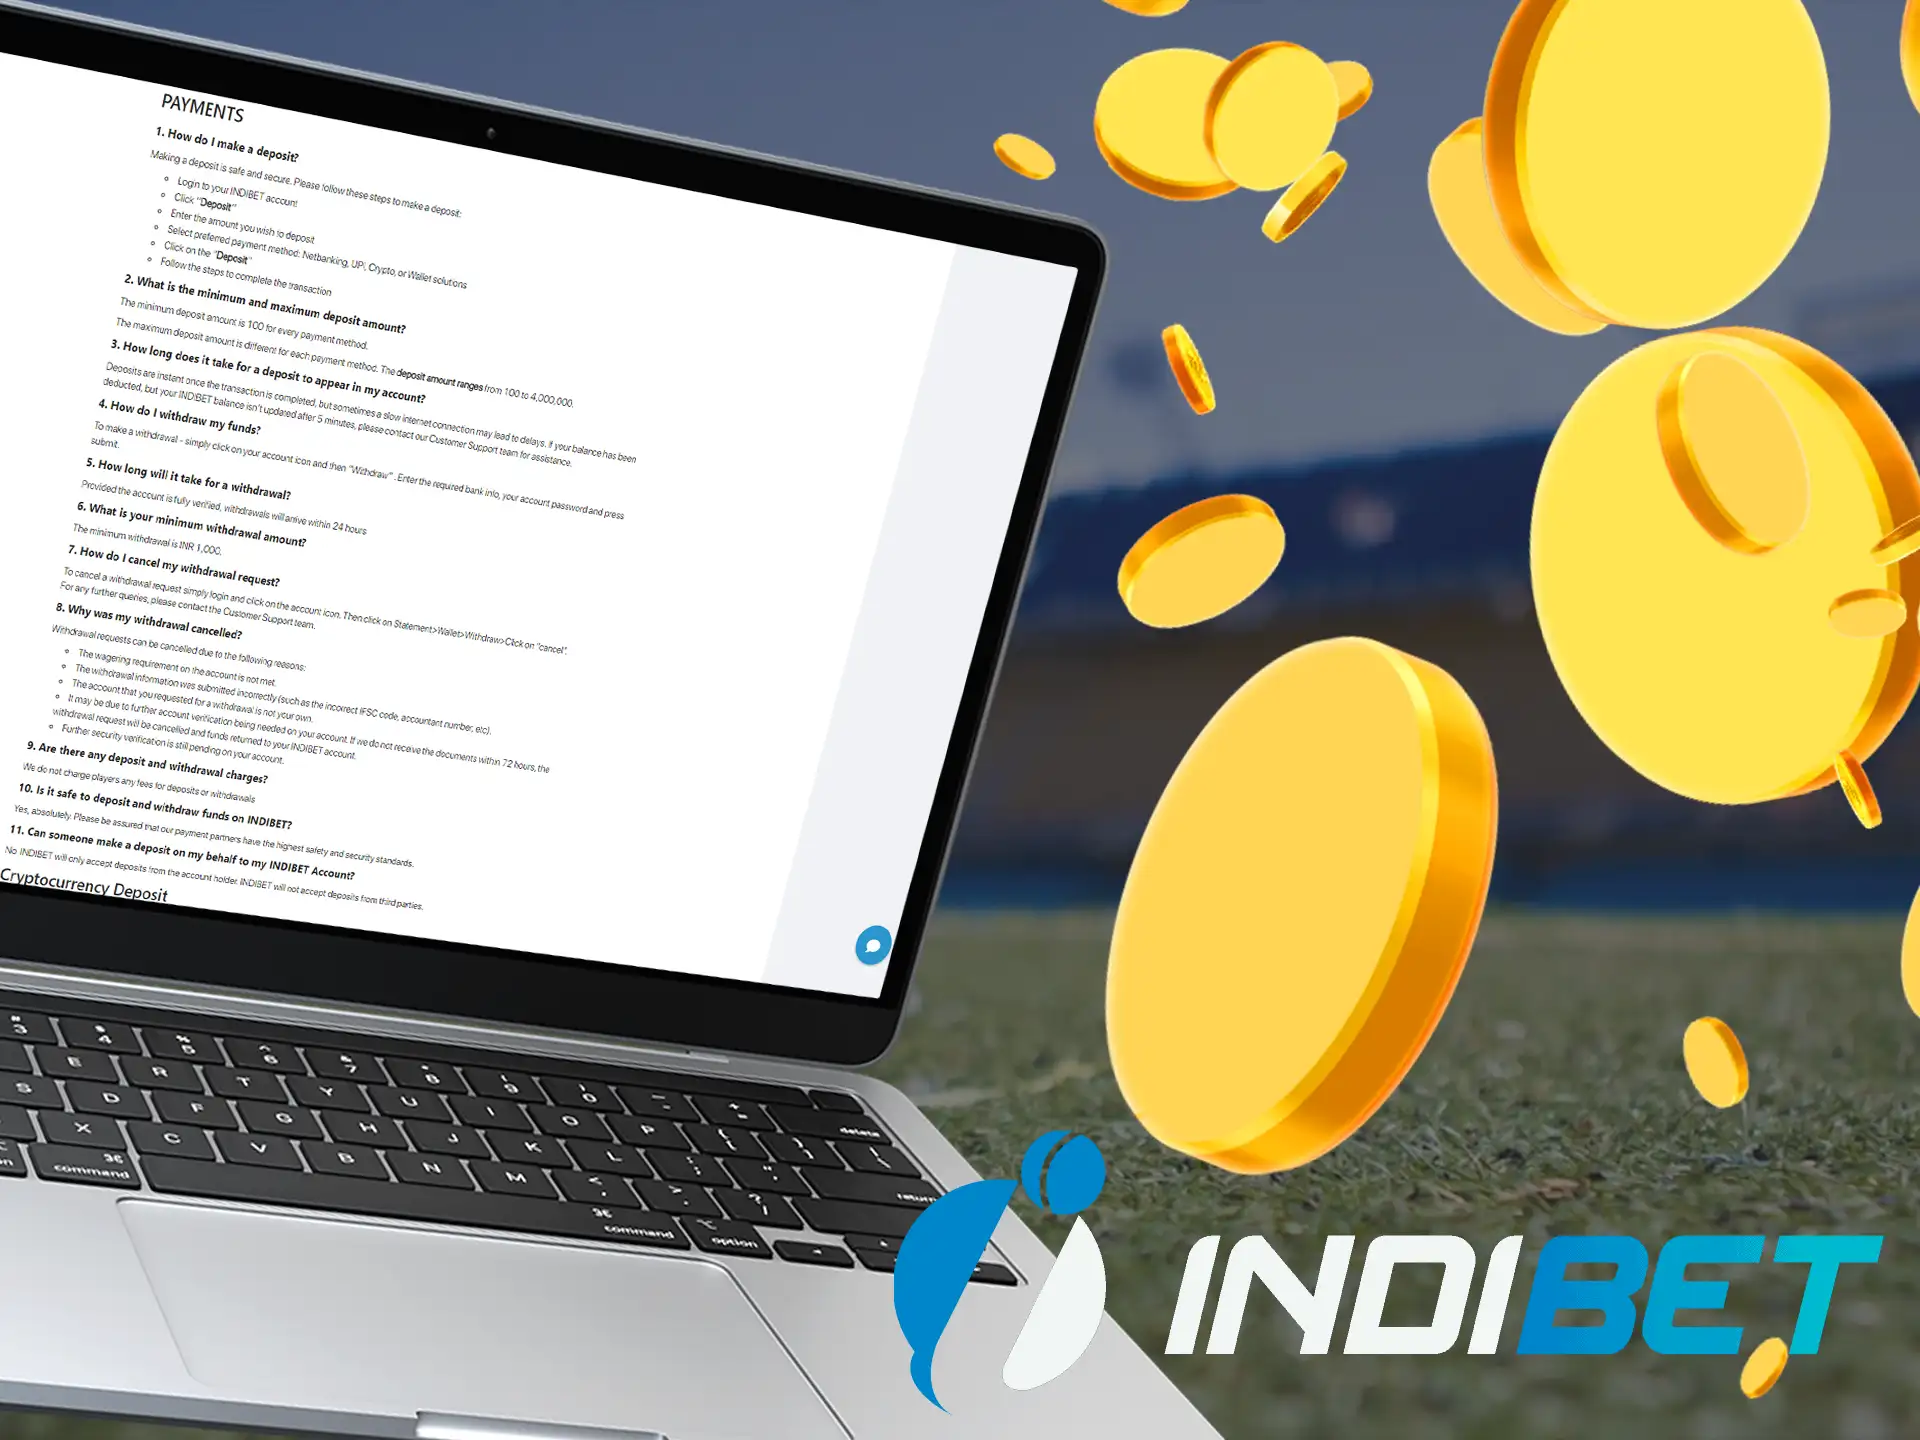 Learn how to top up your balance on Indibet.